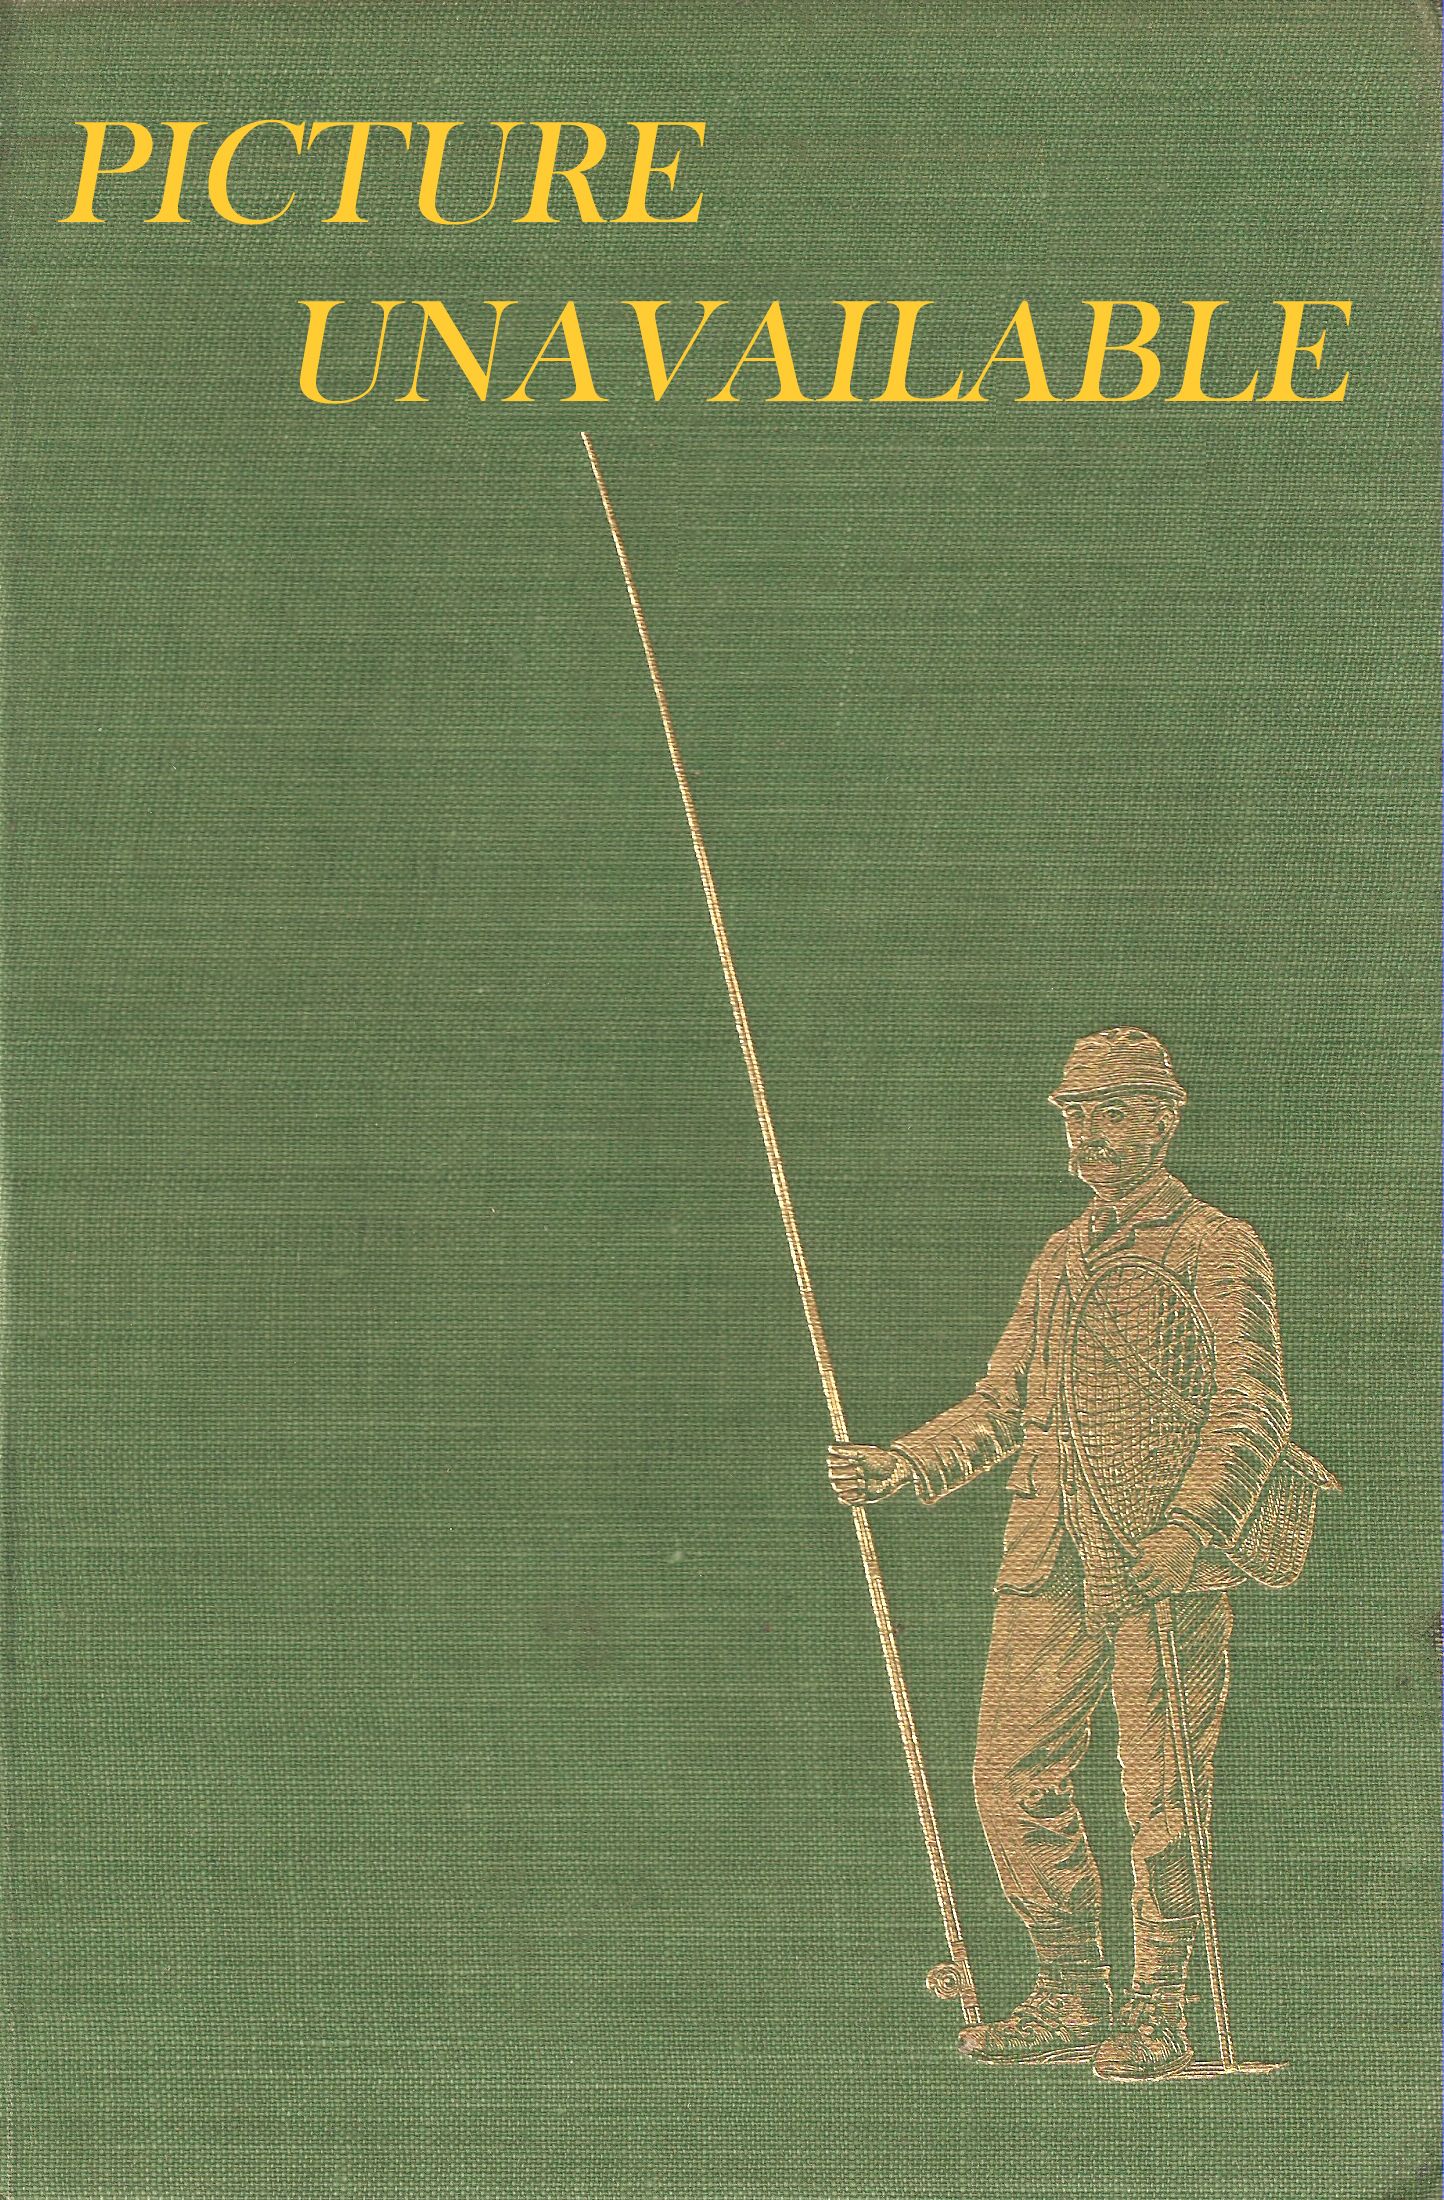 THE SPORTING CHUB. By William J. Howes.